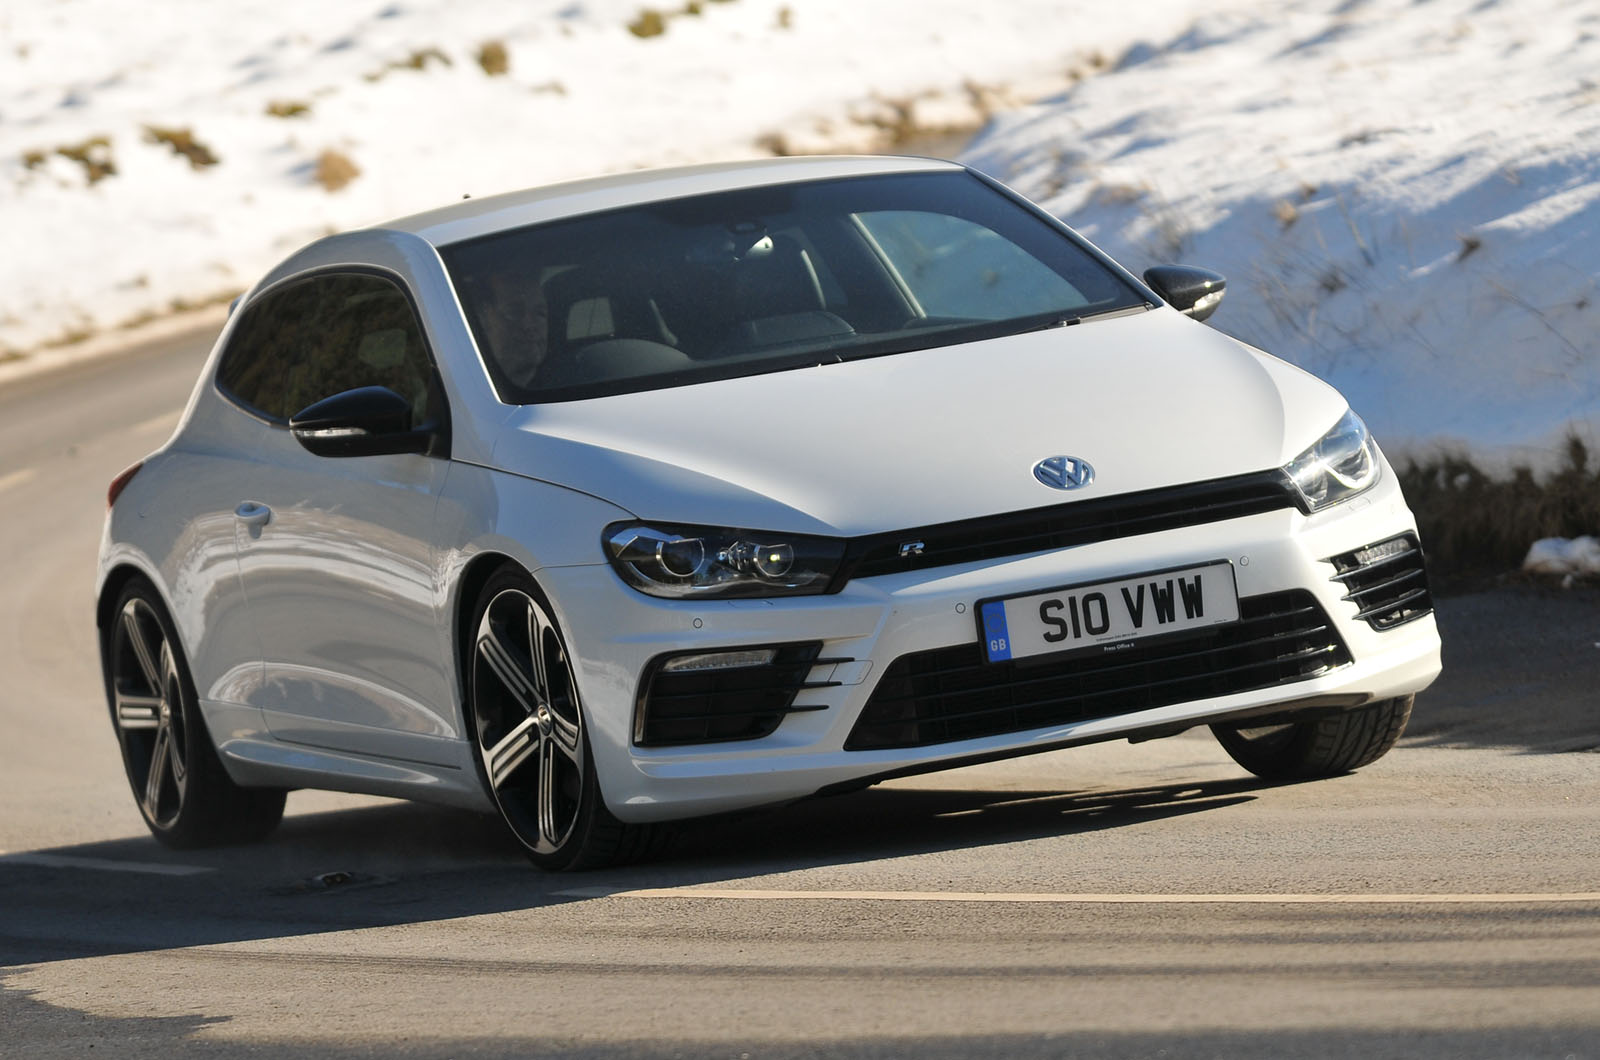 https://www.autocar.co.uk/sites/autocar.co.uk/files/images/car-reviews/first-drives/legacy/vw-scirocco-r-2015-uk-5.jpg